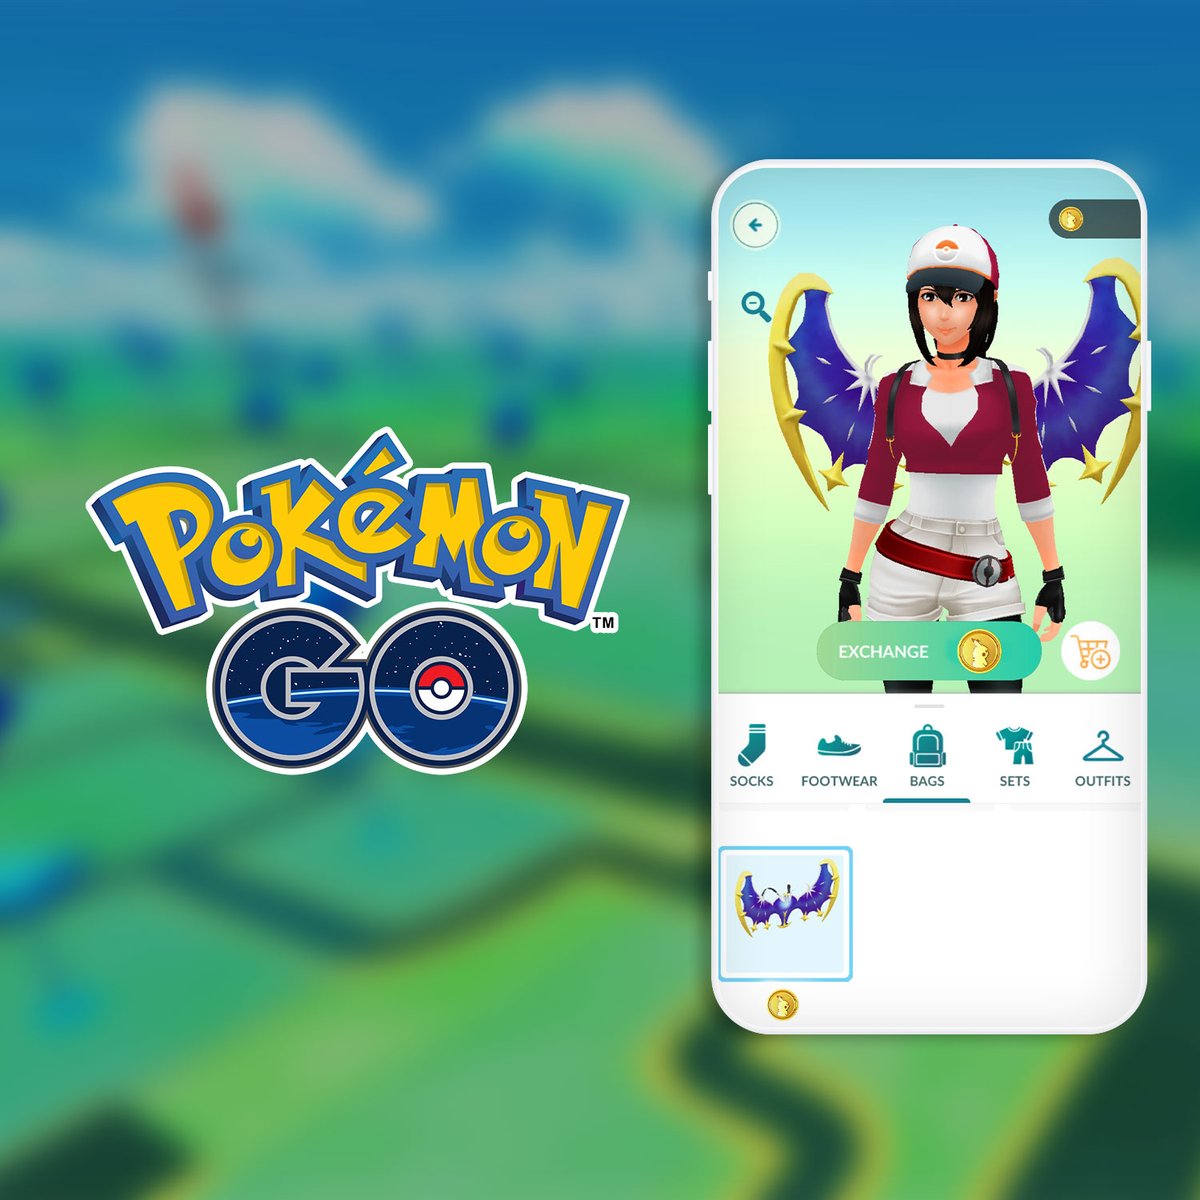 Get ready to upgrade your style, Trainers! 

We’re excited to announce that Pokémon GO’s Style Shop is getting an update!

📝pokemongolive.com/post/style-sho…